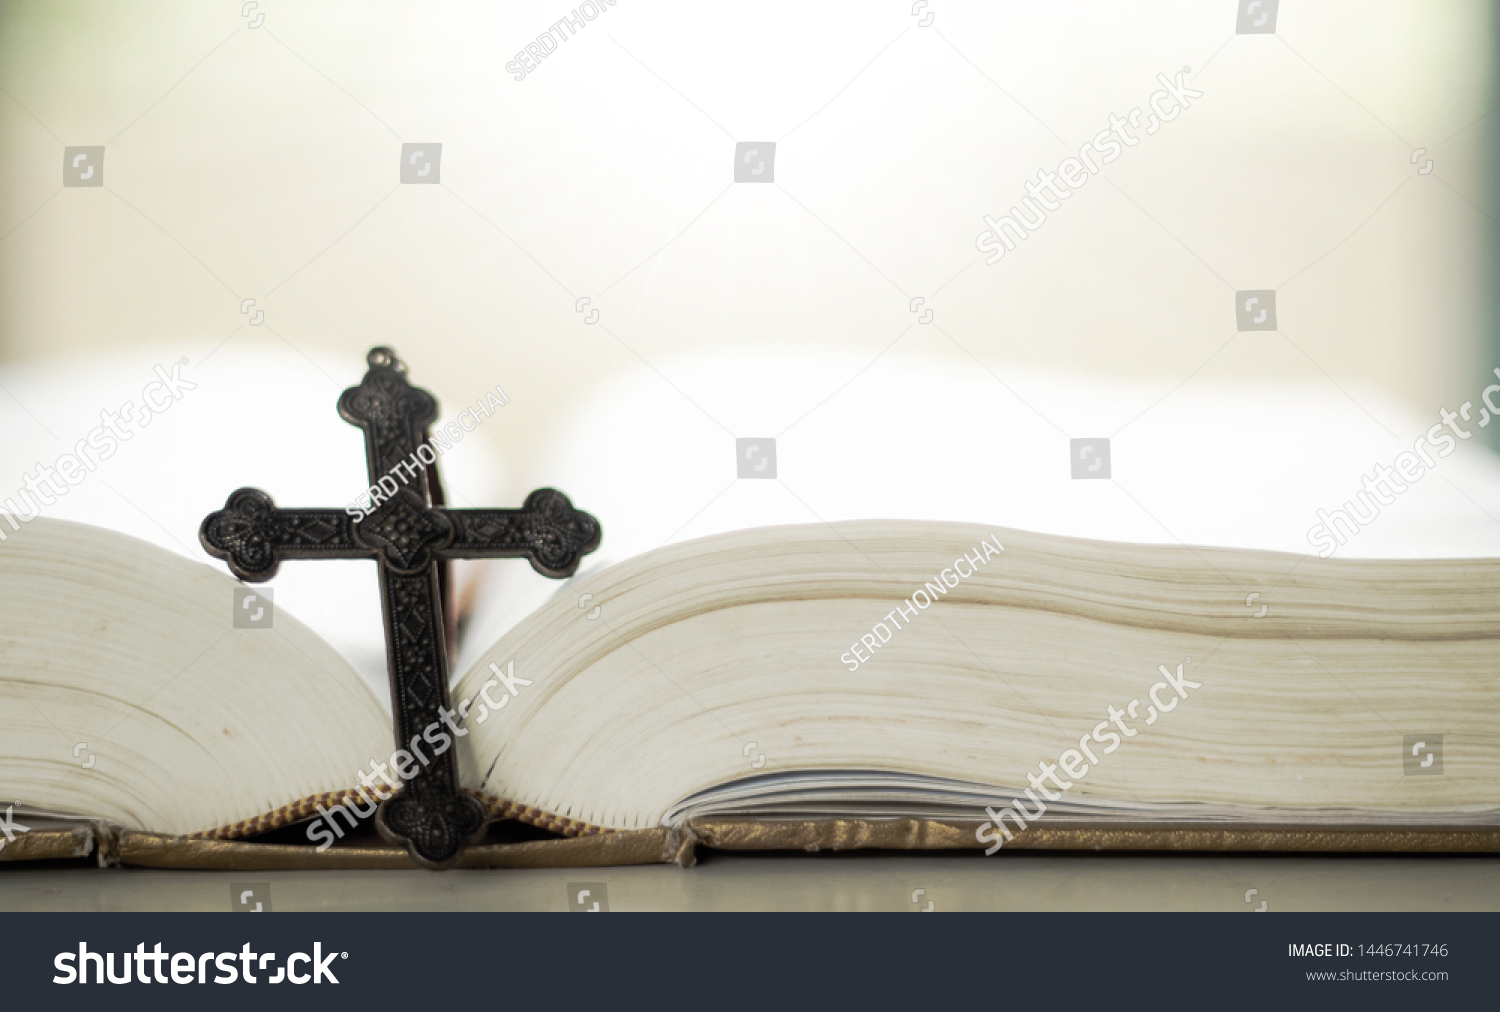 Cross Bible Jesus Christ Abstract Concept Stock Photo (Edit Now) 1446741746